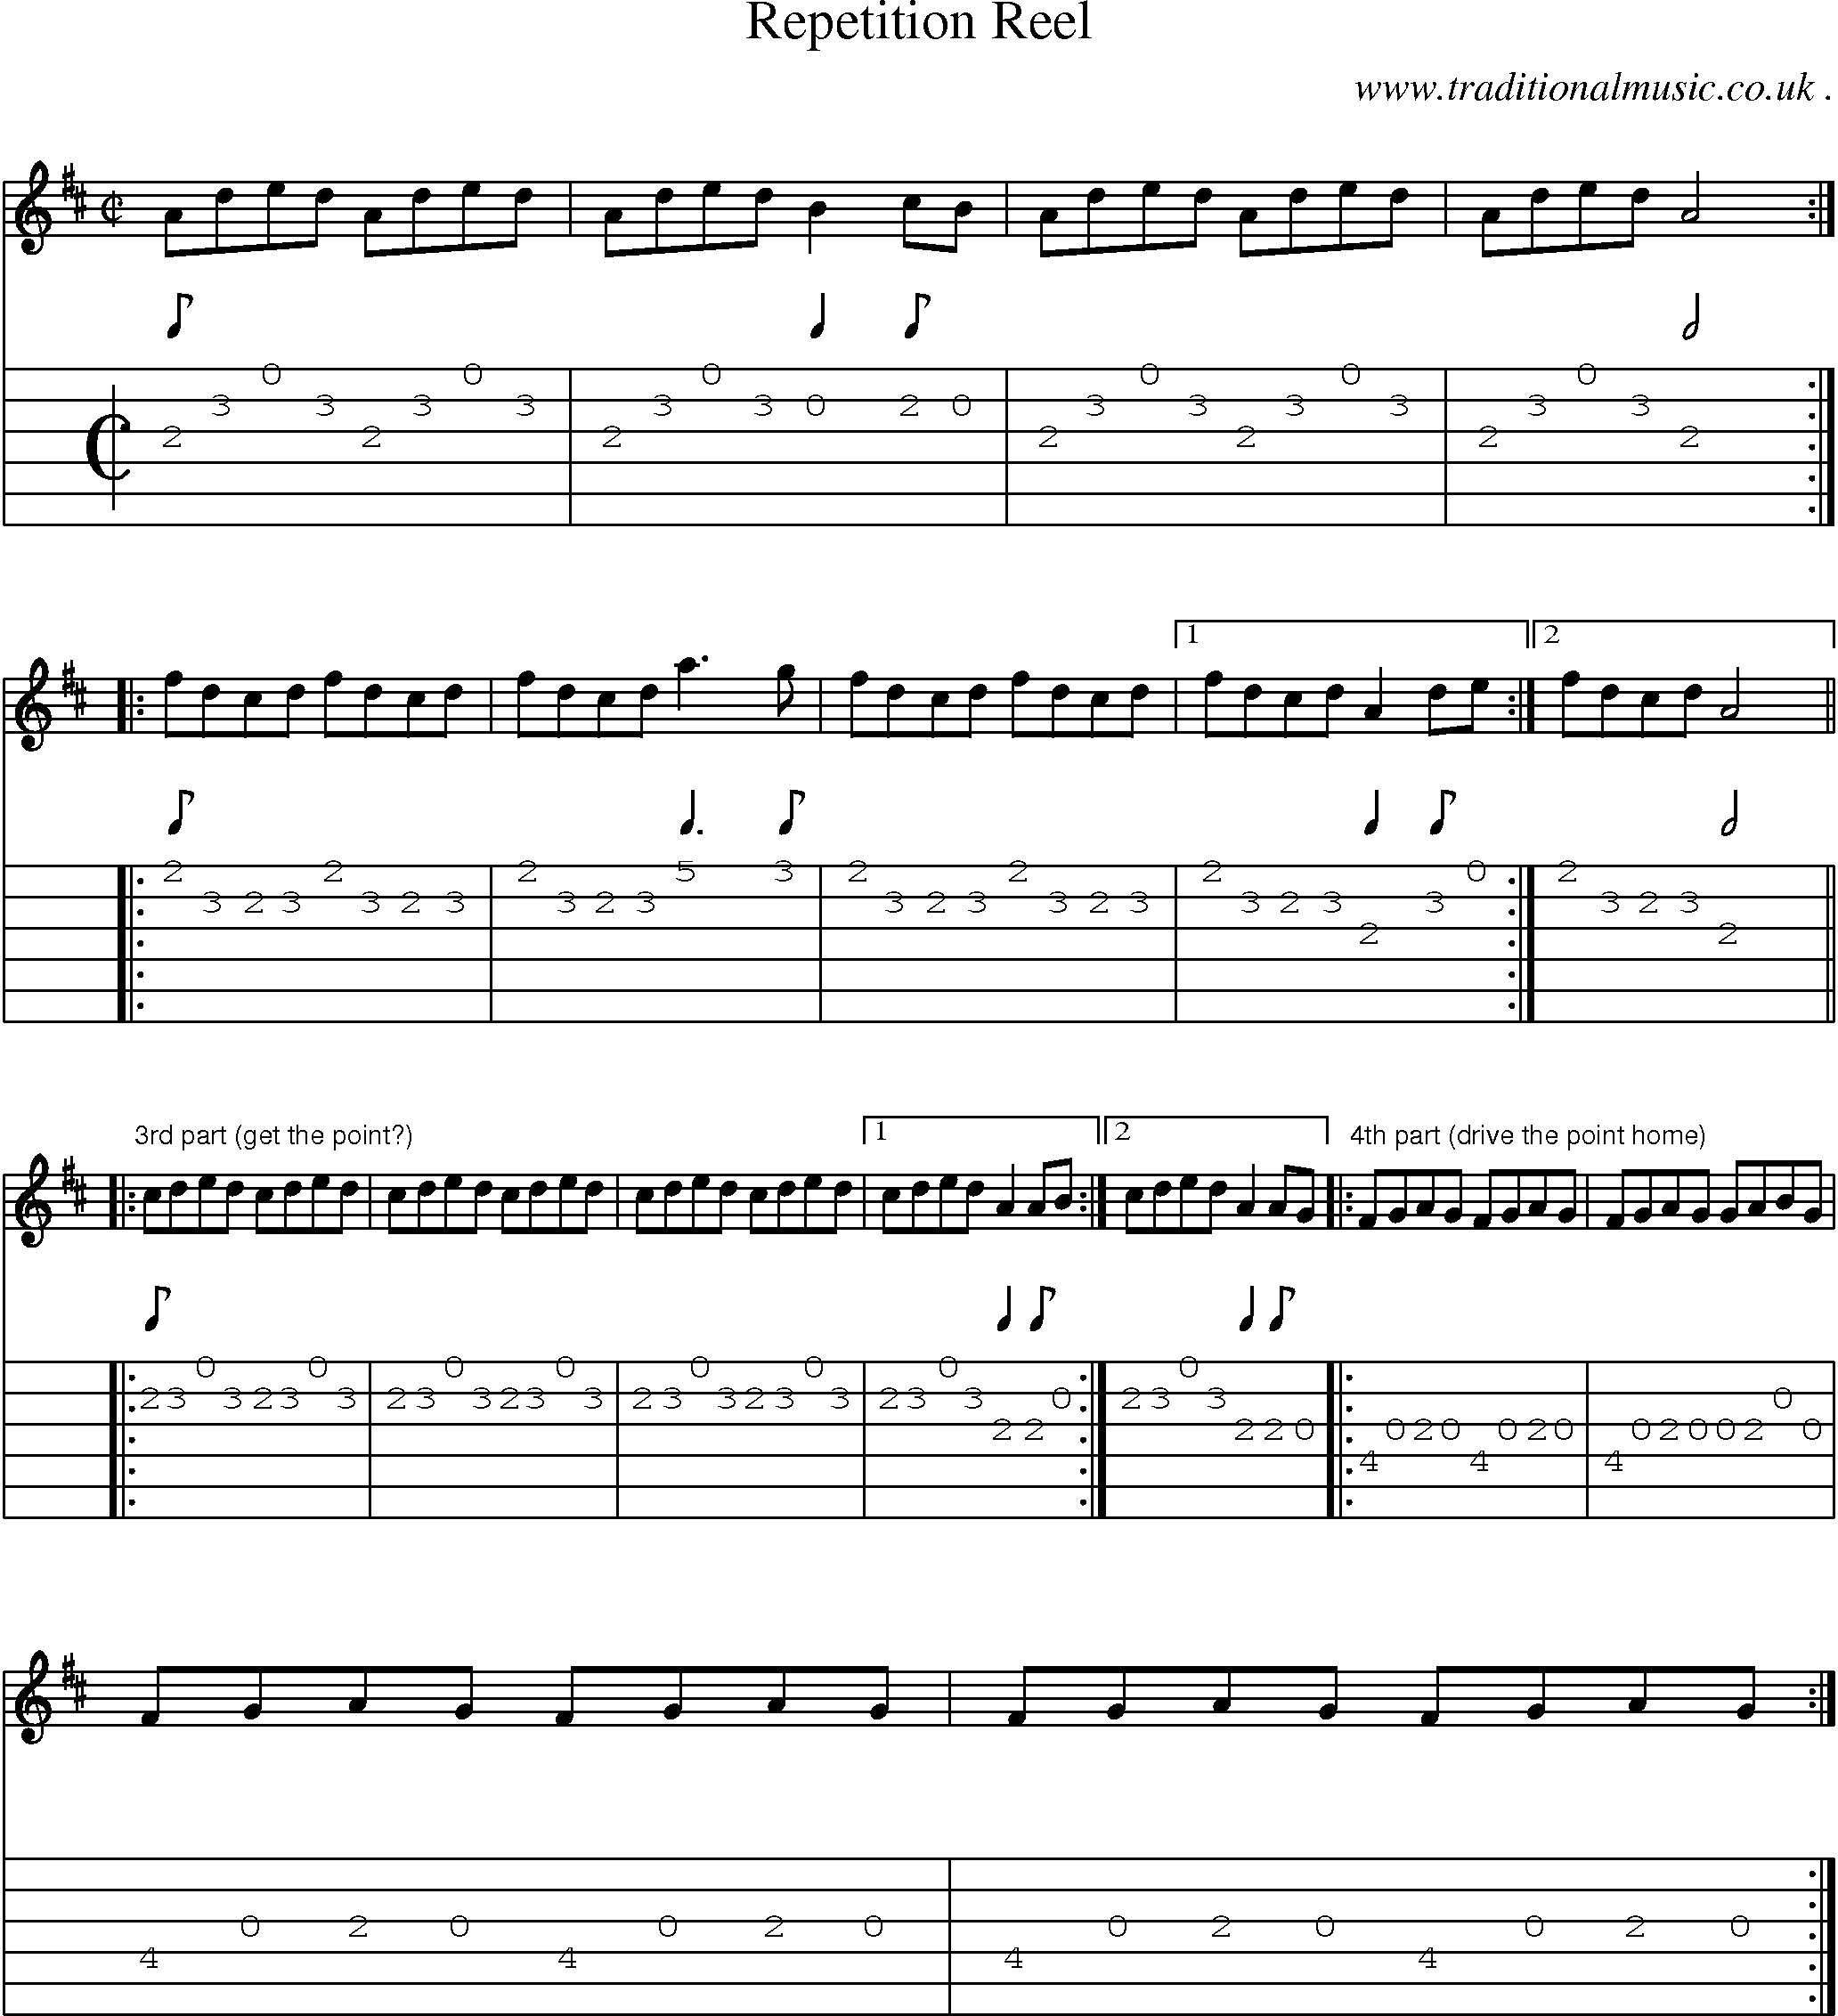 Sheet-Music and Guitar Tabs for Repetition Reel